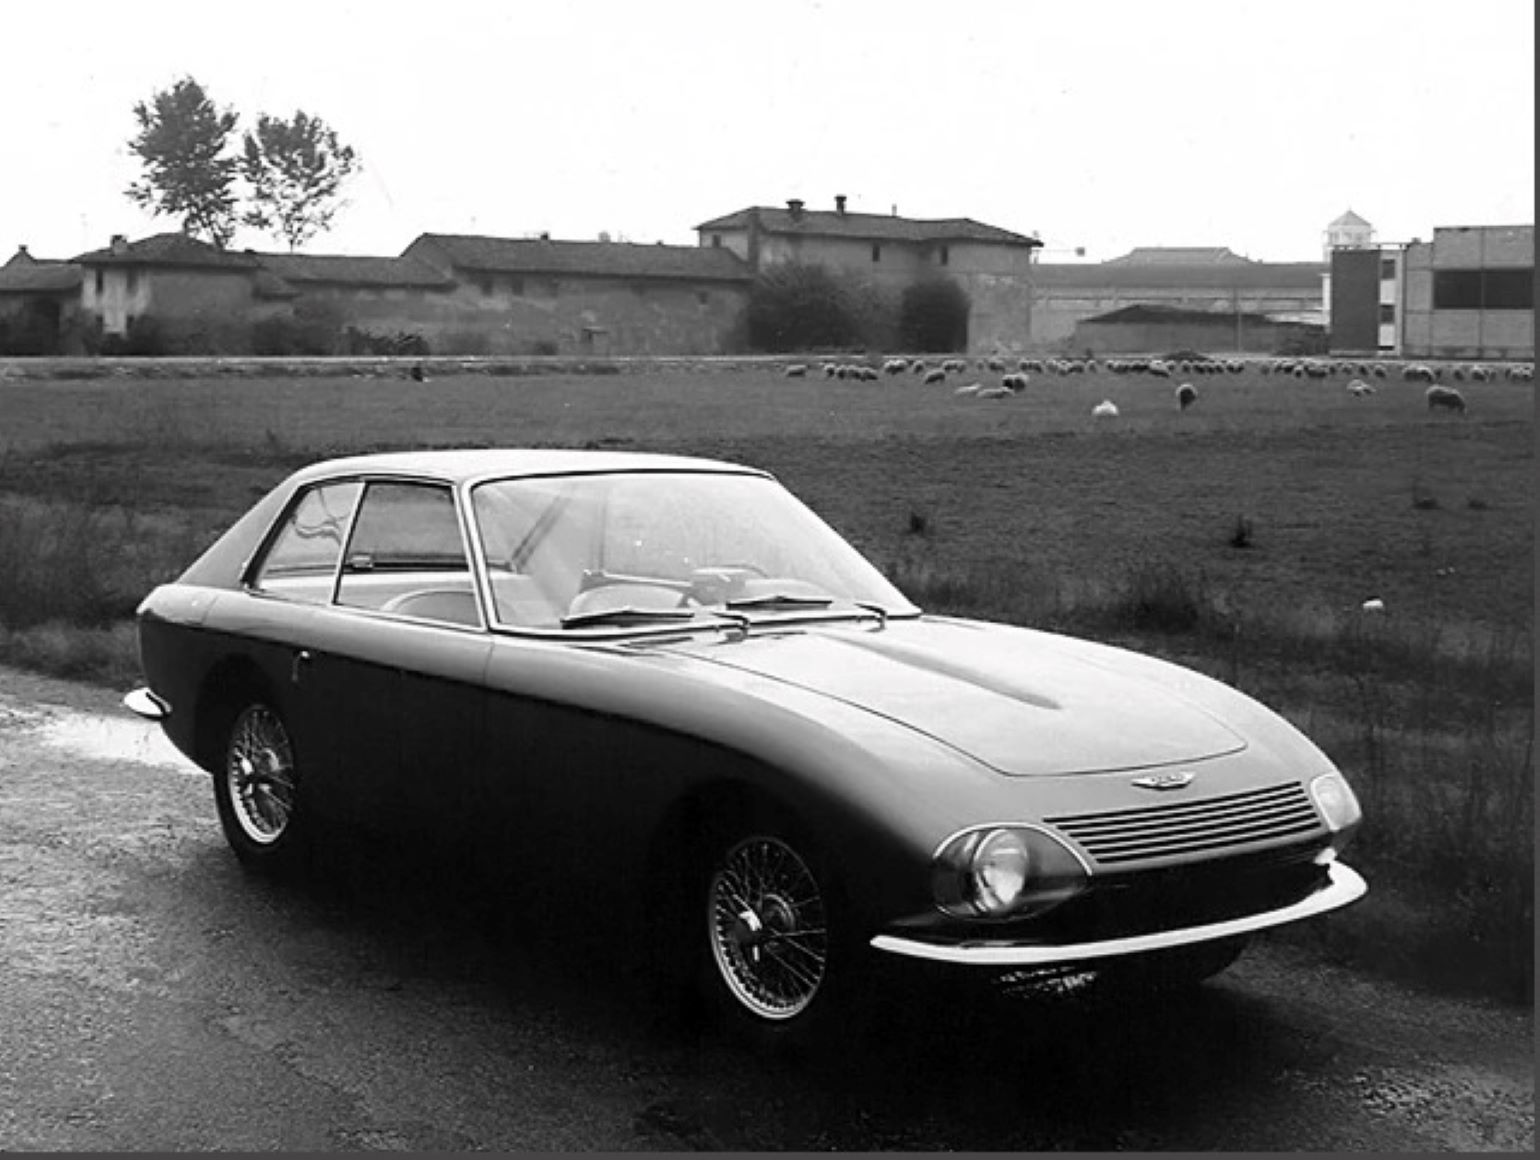 Name:  AH 3000 #2121 AH 3000 Coupe Pininfarina photo front 3-4 arch Classic and Recreation Sportscars.jpg
Views: 216
Size:  171.0 KB